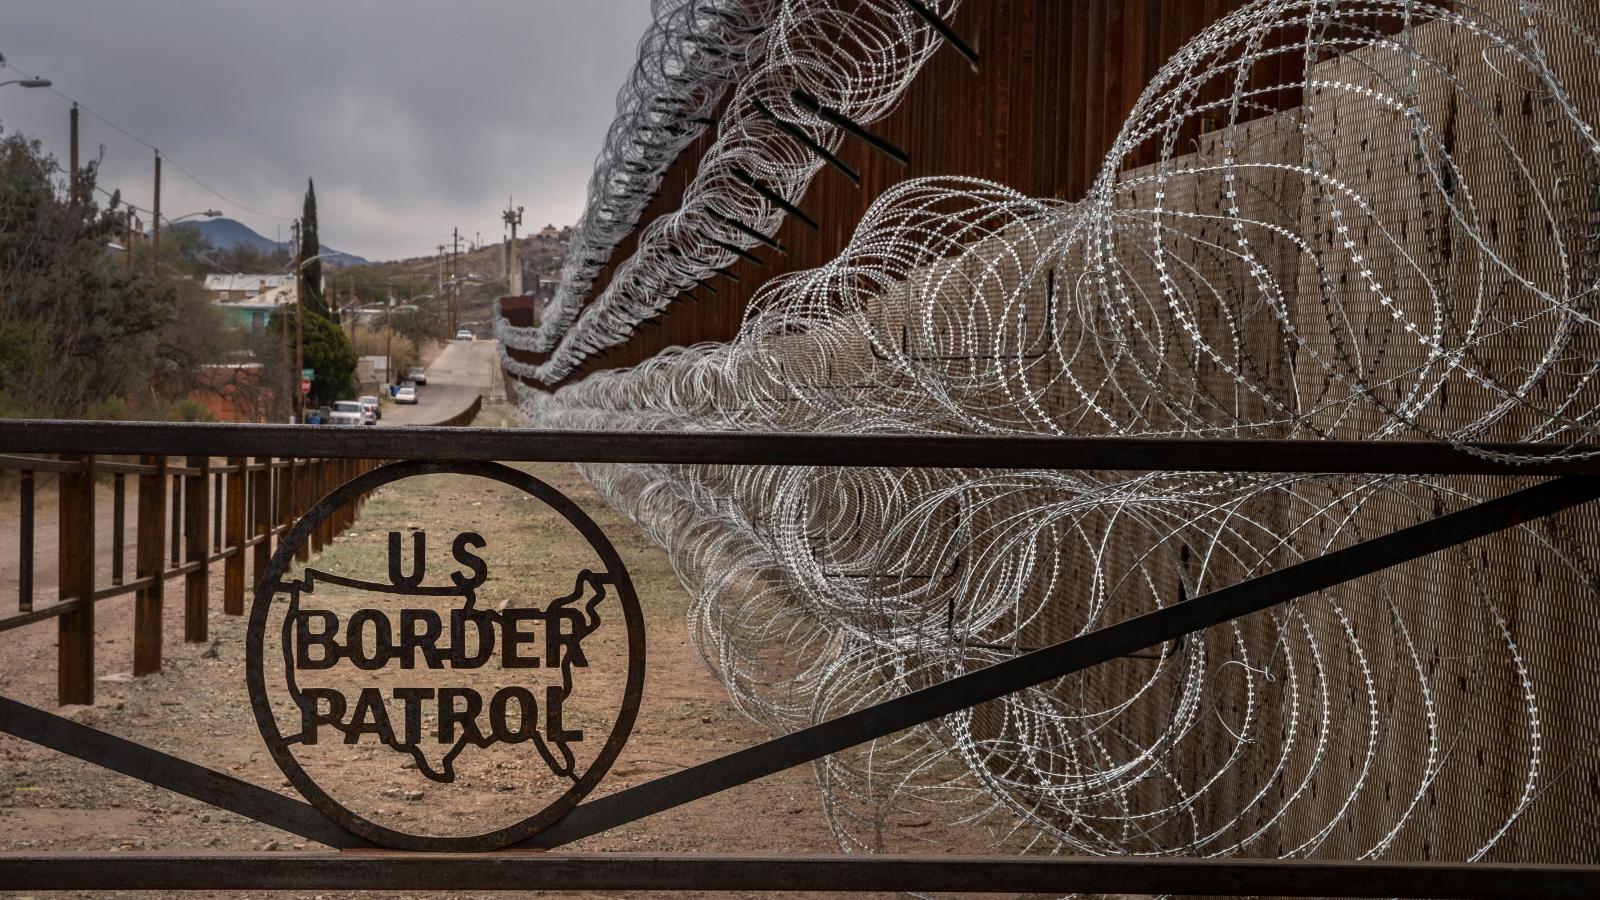 A metal fence marked with the US Border Patrol sign at the US/Mexico border fence, in Nogales, Arizona.